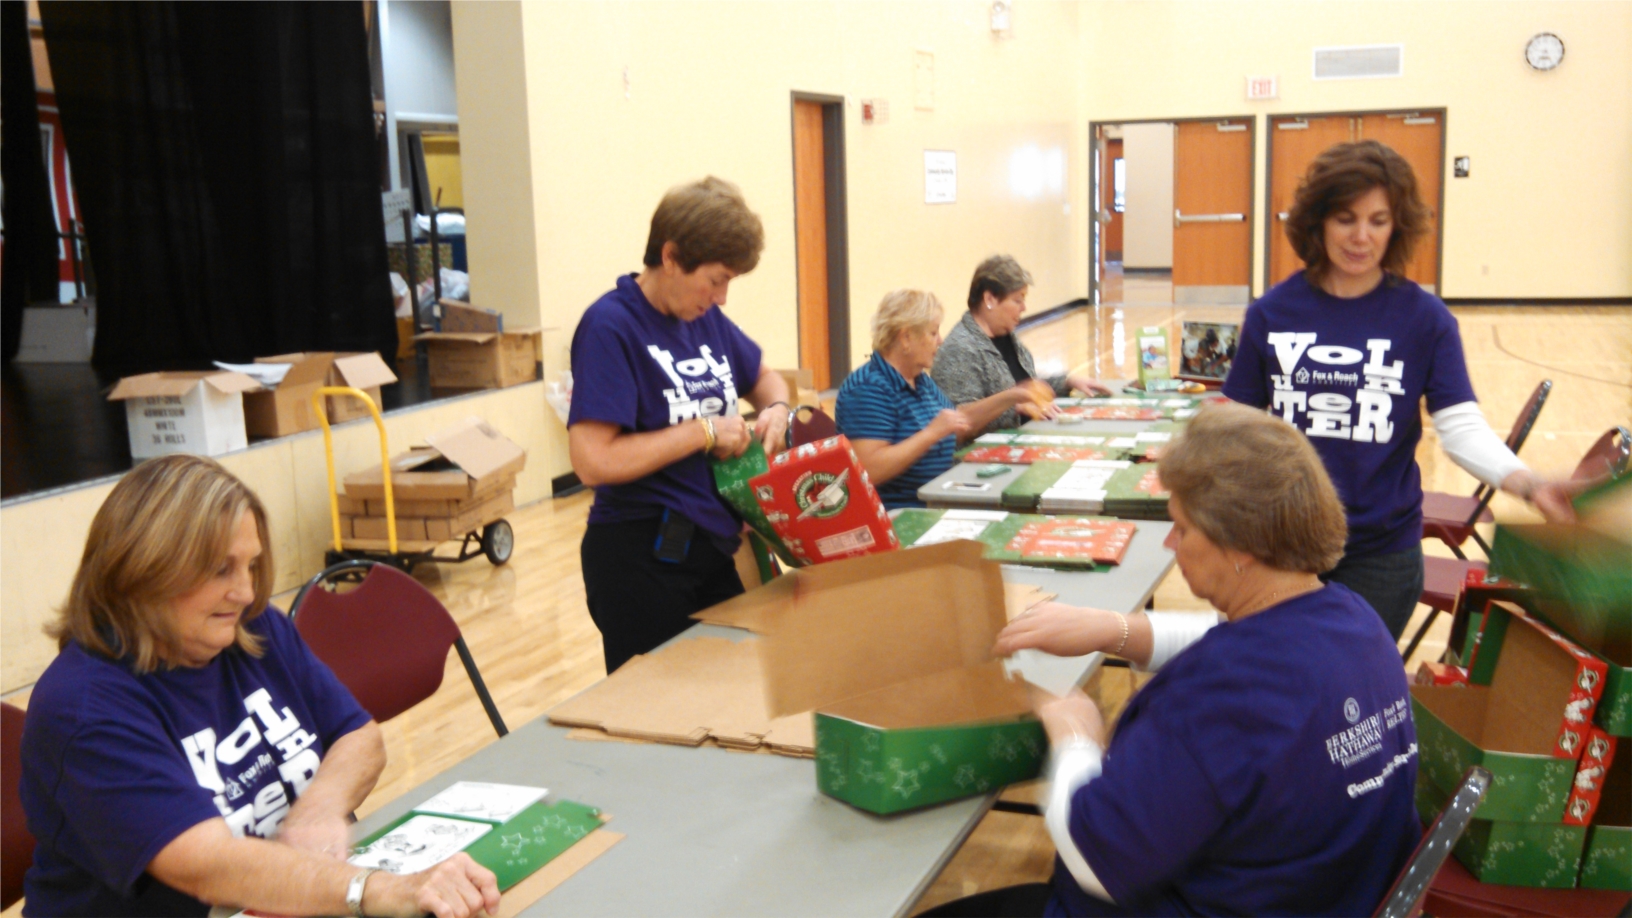 Community Service Day 2014 - BHHS Fox & Roach Allentown Office volunteering at Operation Christmas Child.